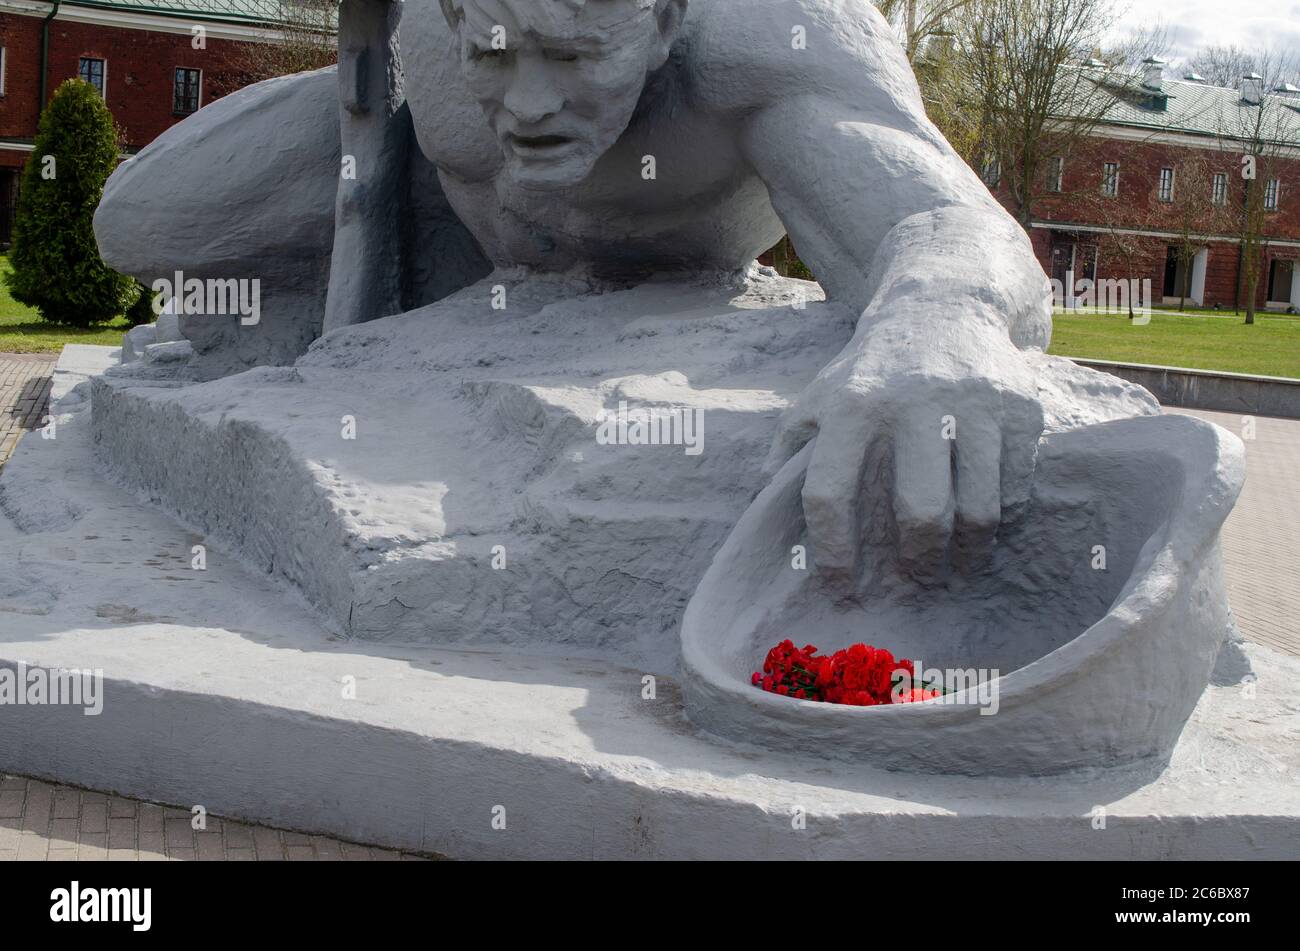 Brest, Belarus - April 18, 2020: Image with a sculpture to the monument Thirst of the Brest Fortress. Stock Photo